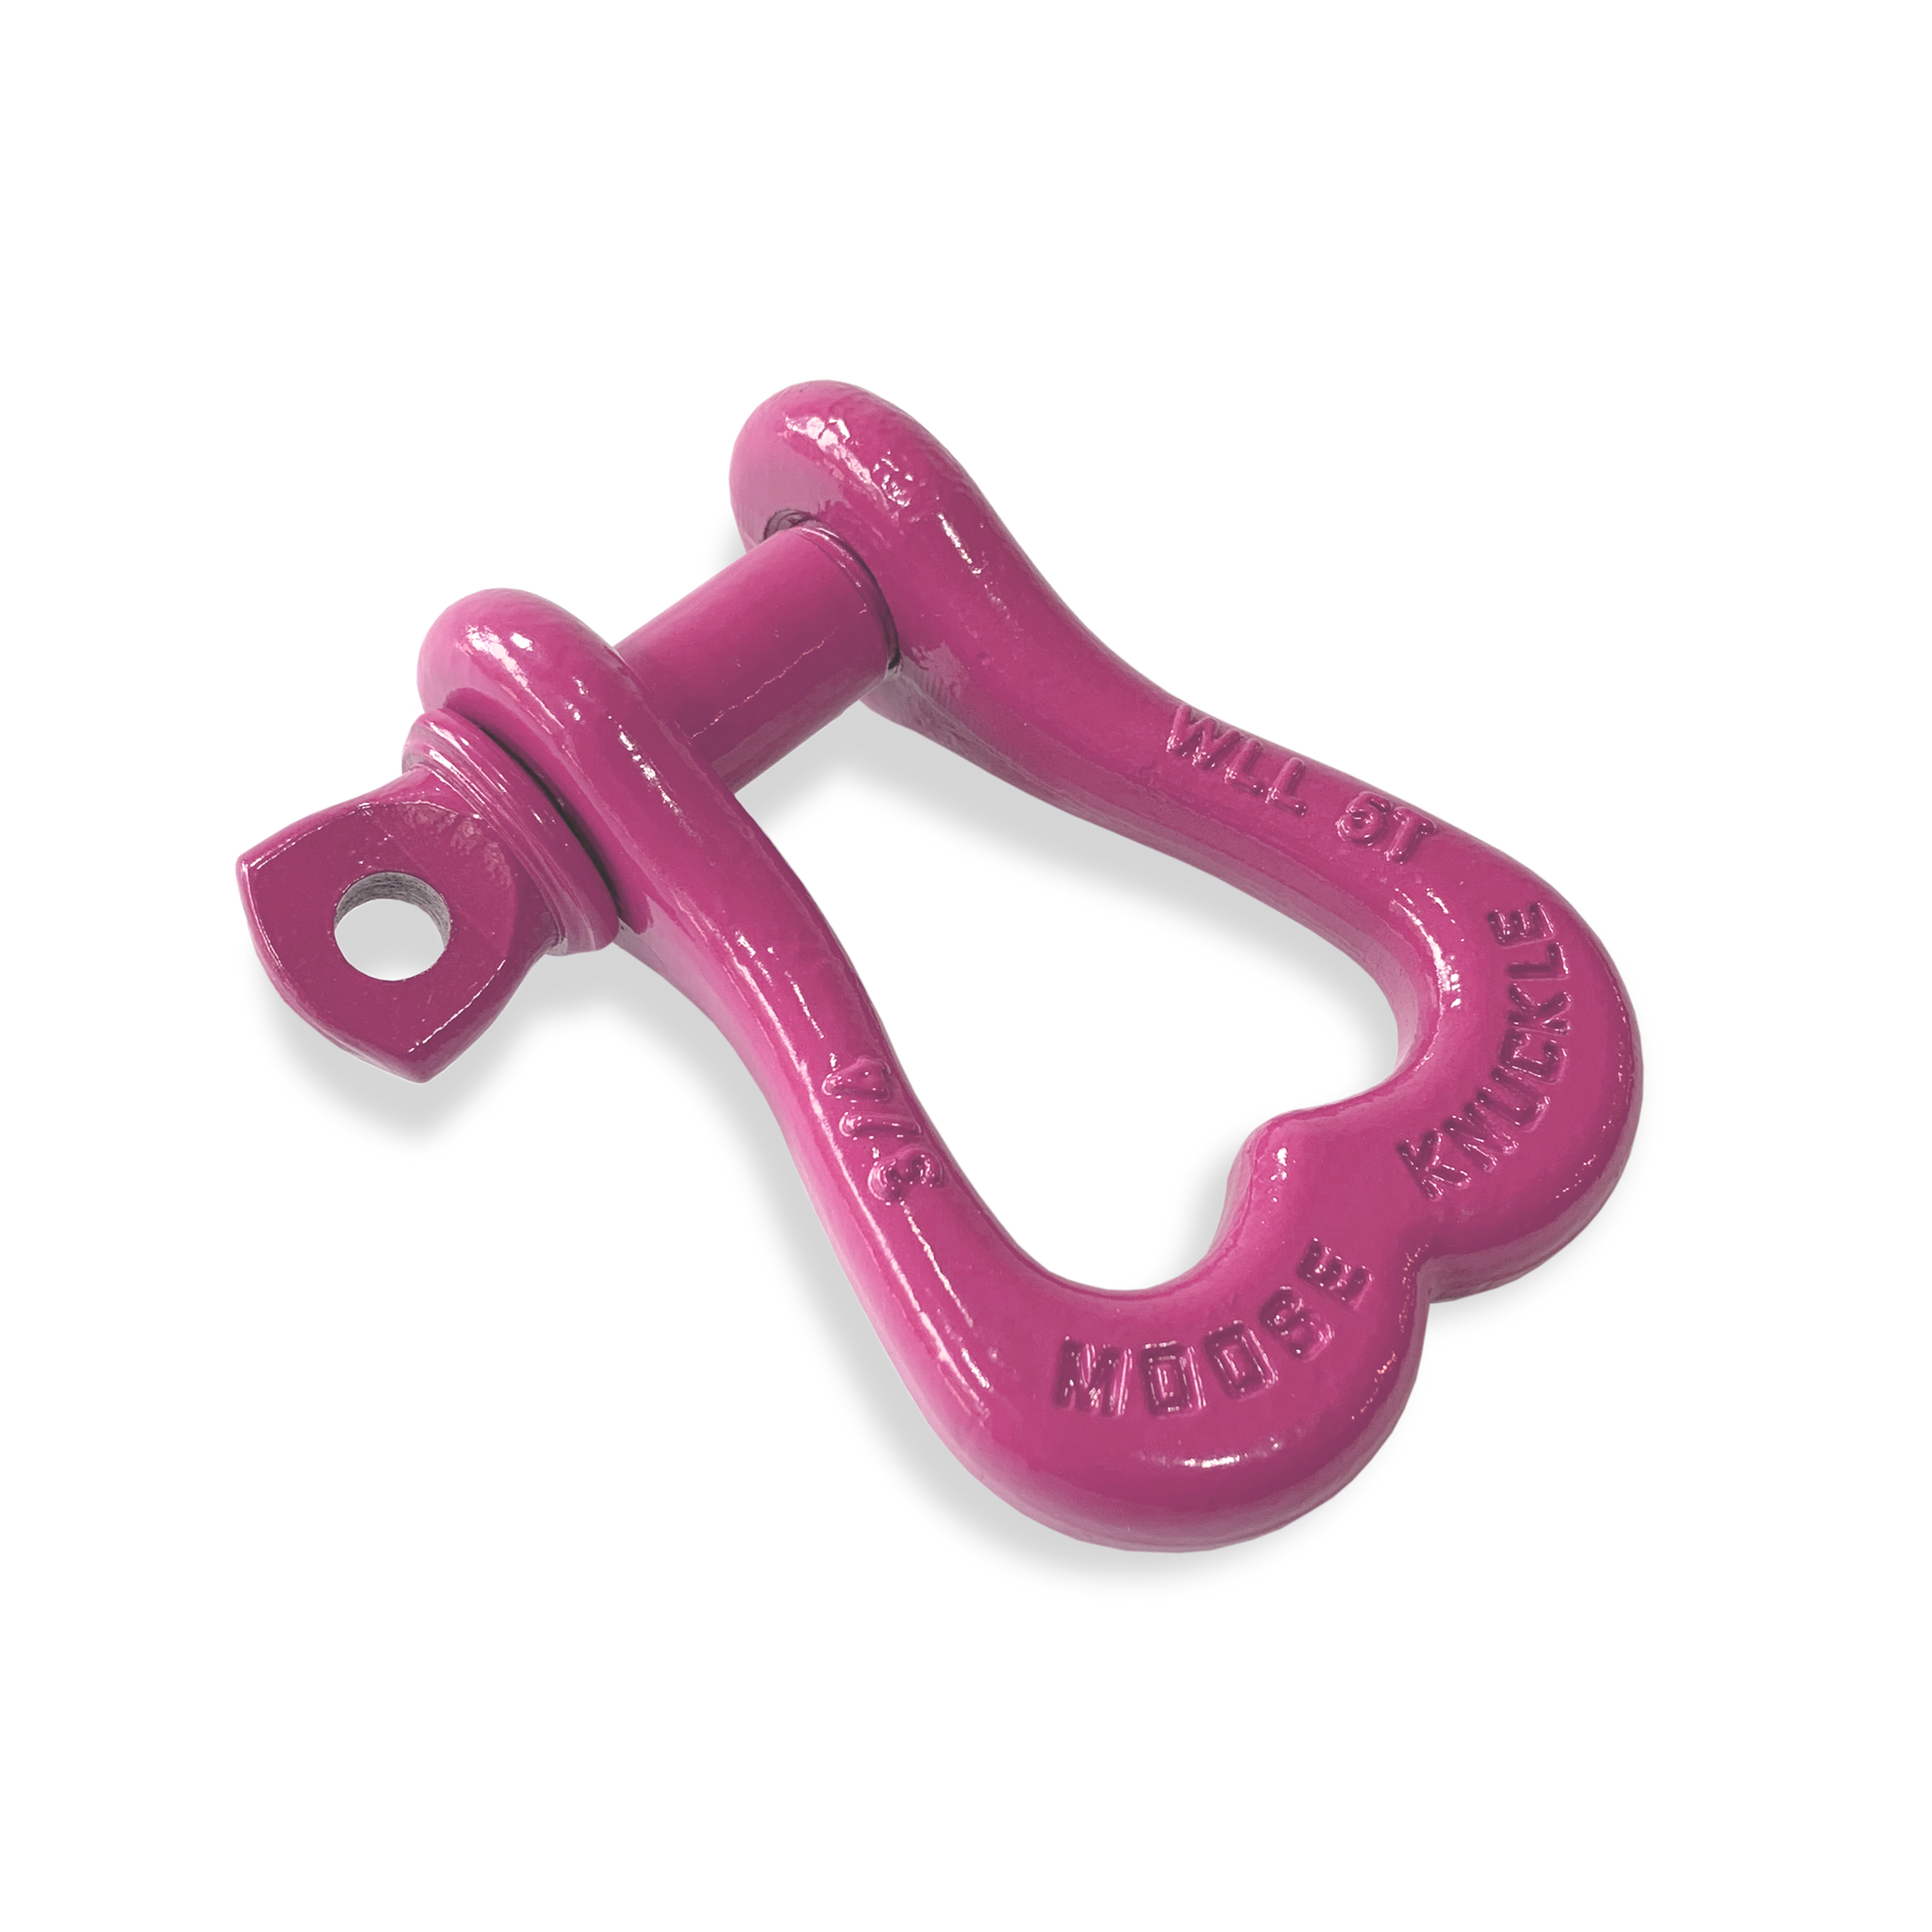 Moose Knuckle XL Pretty Pink Bow D-Ring 3/4" Shackle for Off-Road Closed Loop 4x4 and SxS Vehicle Recovery